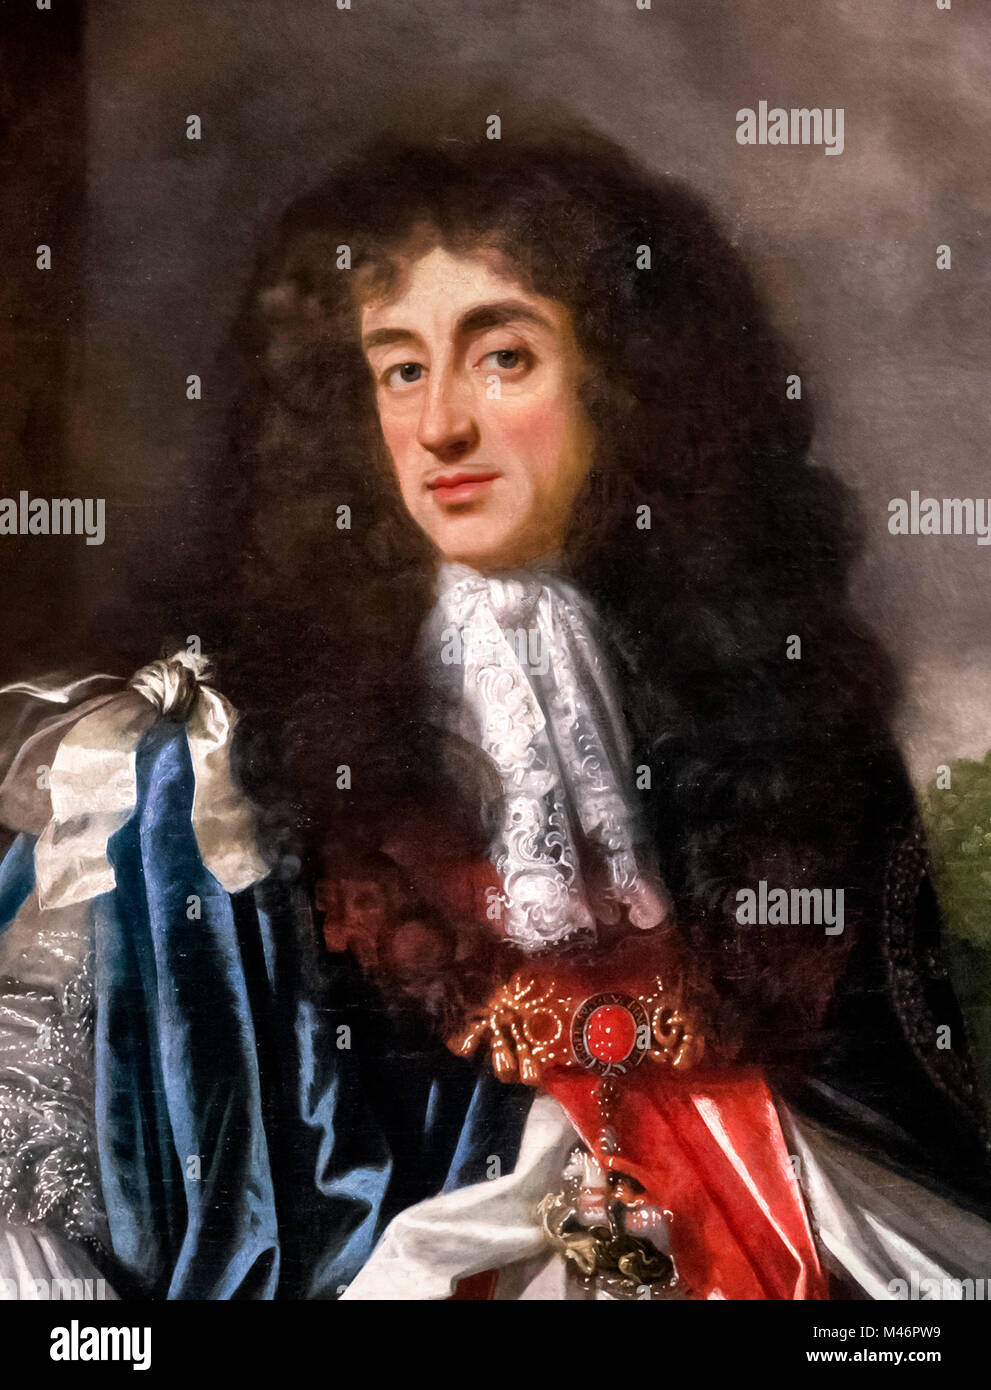 Charles II. Portrait of King Charles II in the robes of the Order of the Garter, by Simon Verelst, oil on canvas, c.1677-85. Detail from a larger painting, M46PWF. Stock Photo